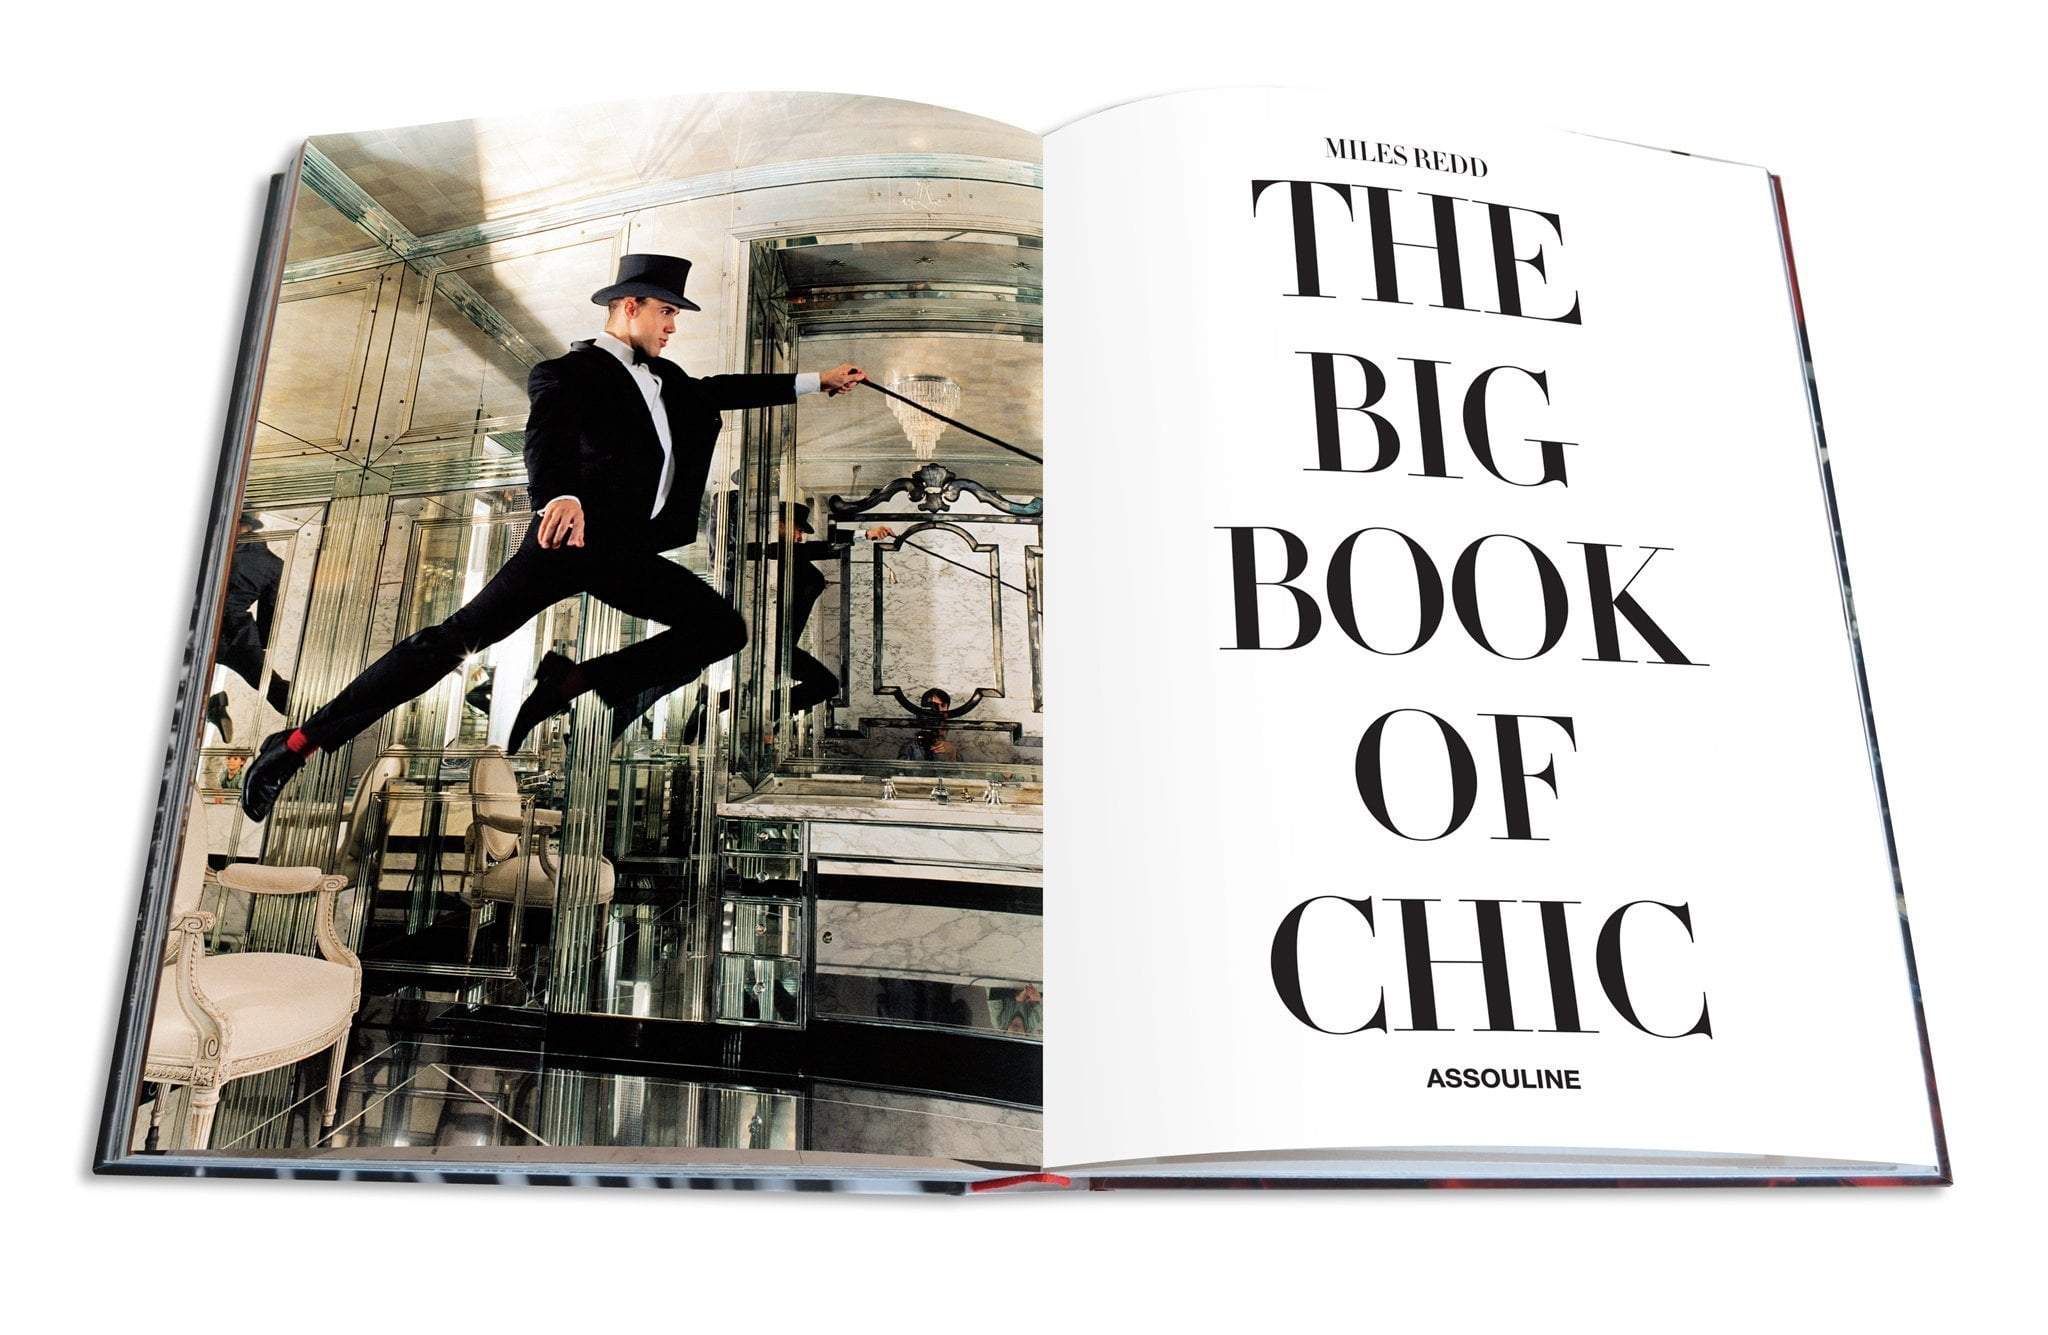 LIVRE THE BIG BOOK OF CHIC